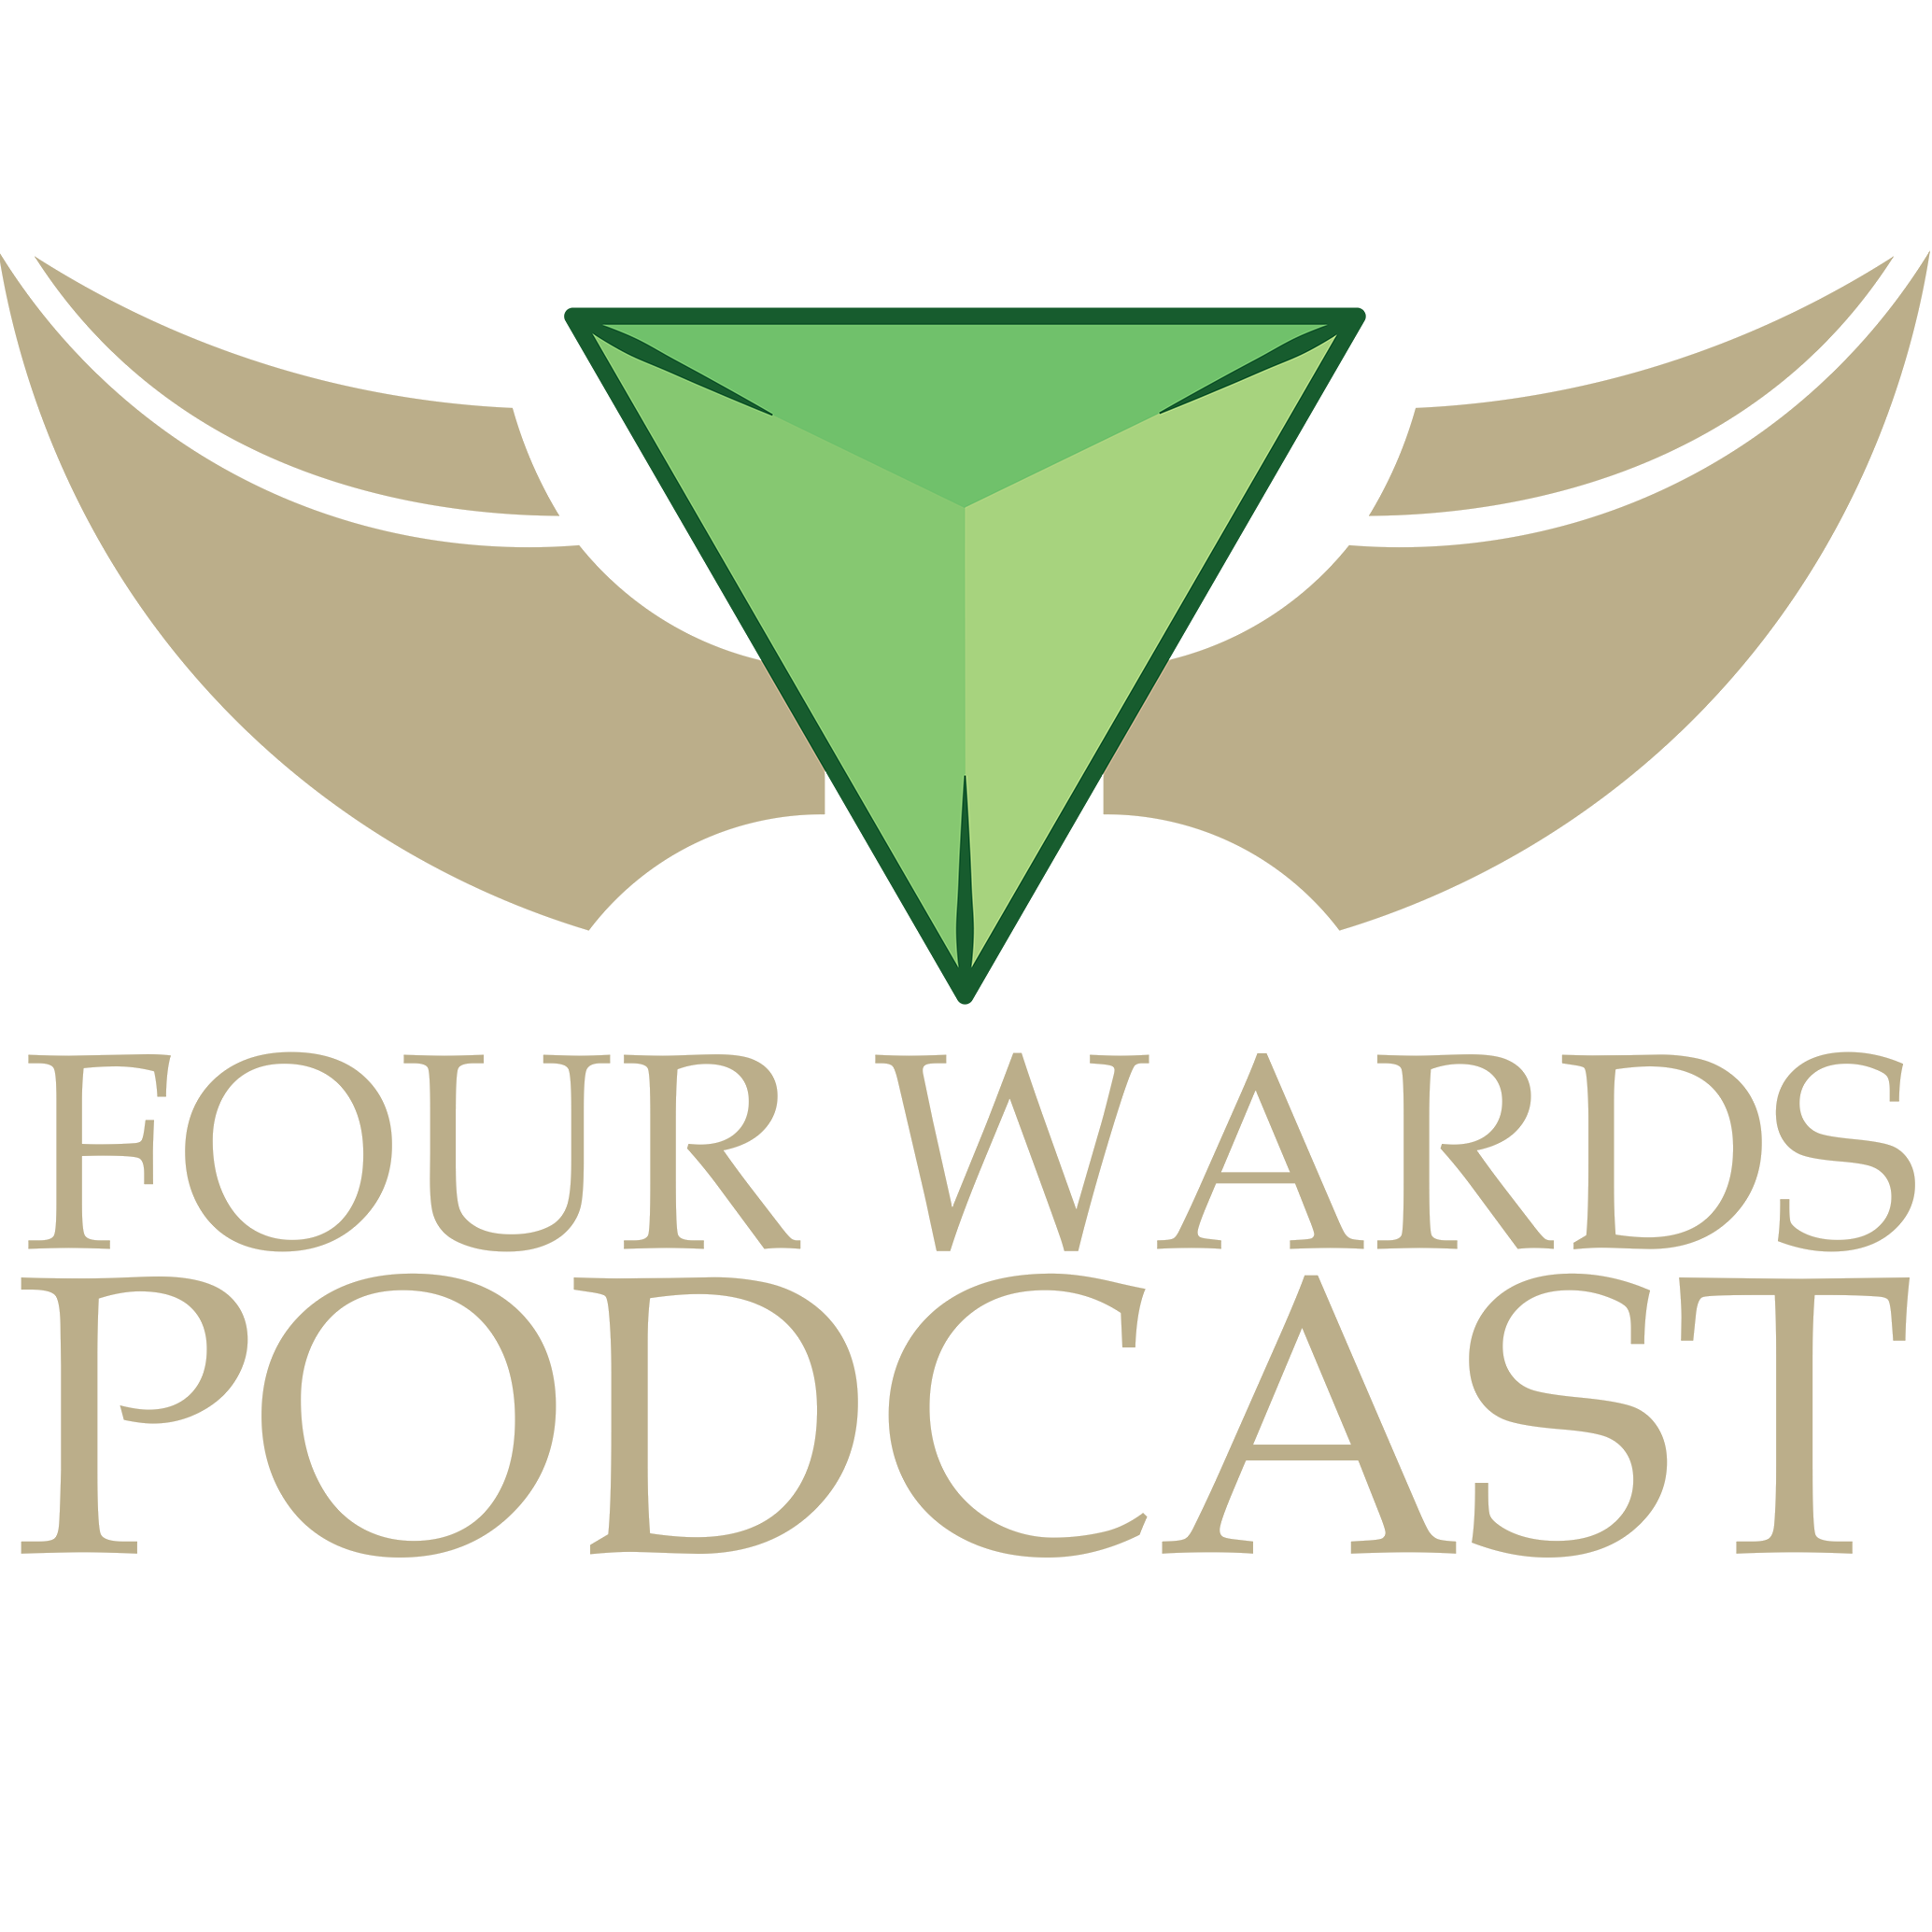 The Four Wards Podcast - Episode 437: They Want You, They Want You, They Want You As A New Recruit